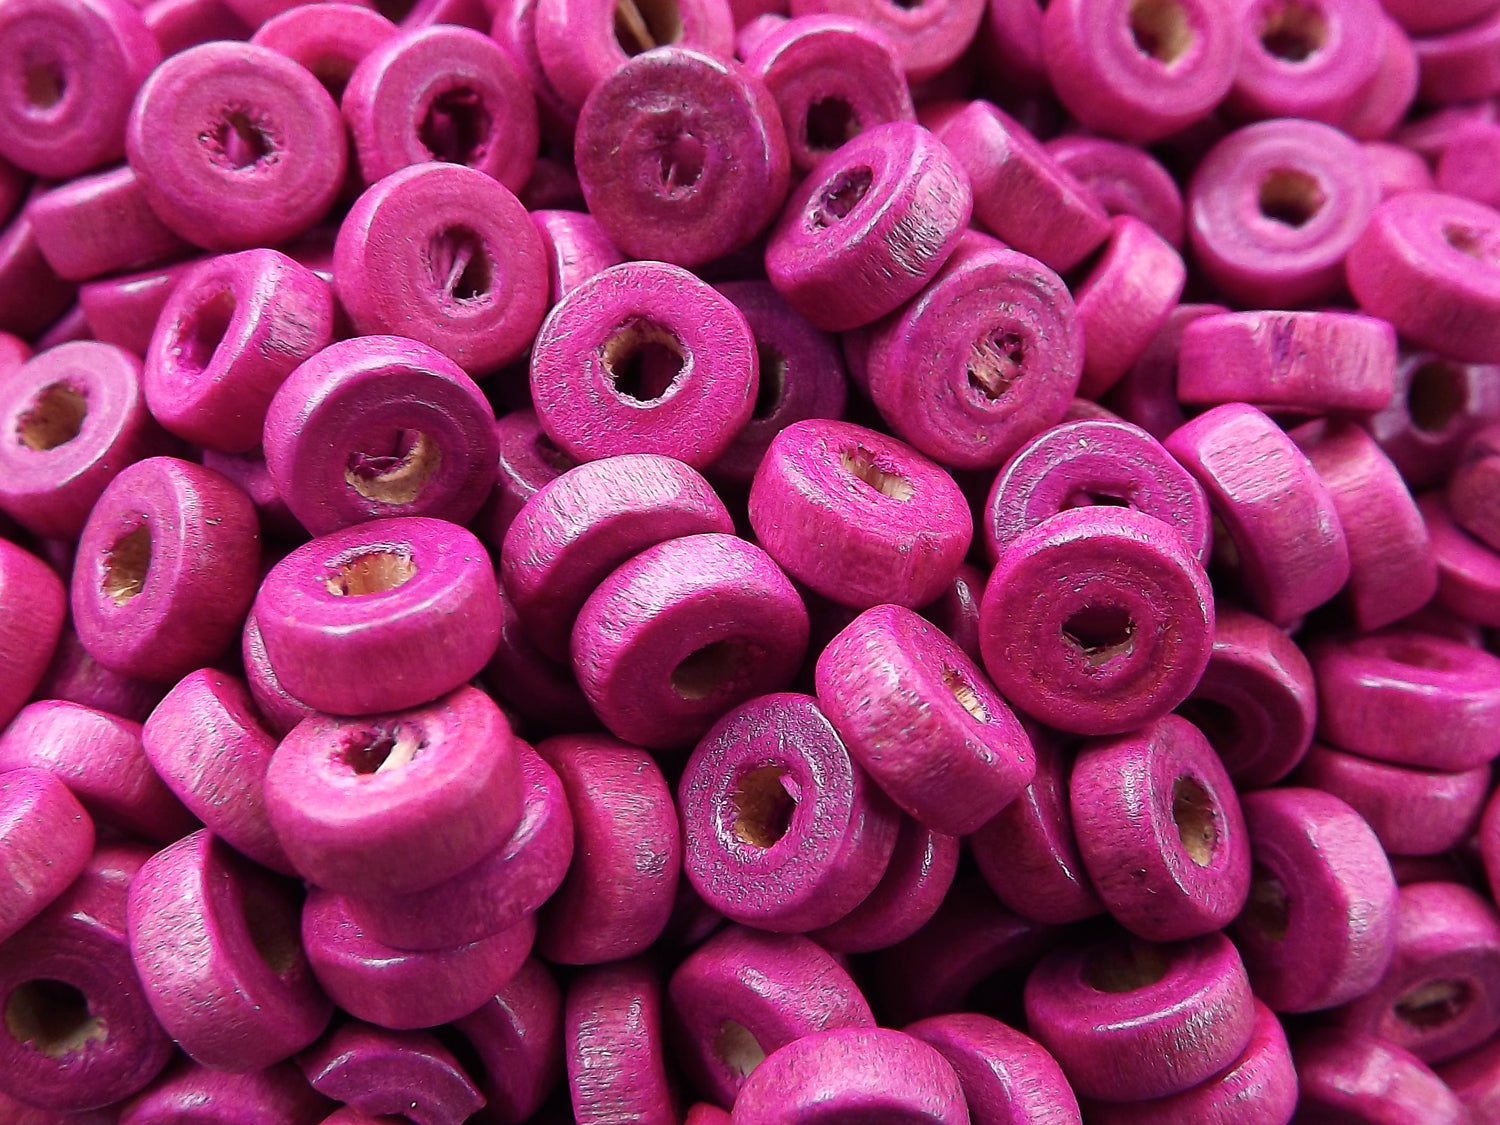 Violet Pink Round Rondelle Heishi Wood Beads Satin Varnished Plain Simple Round Smooth Ball Bead Spacers 8mm Choose 50pcs, 200pcs or 400pcs